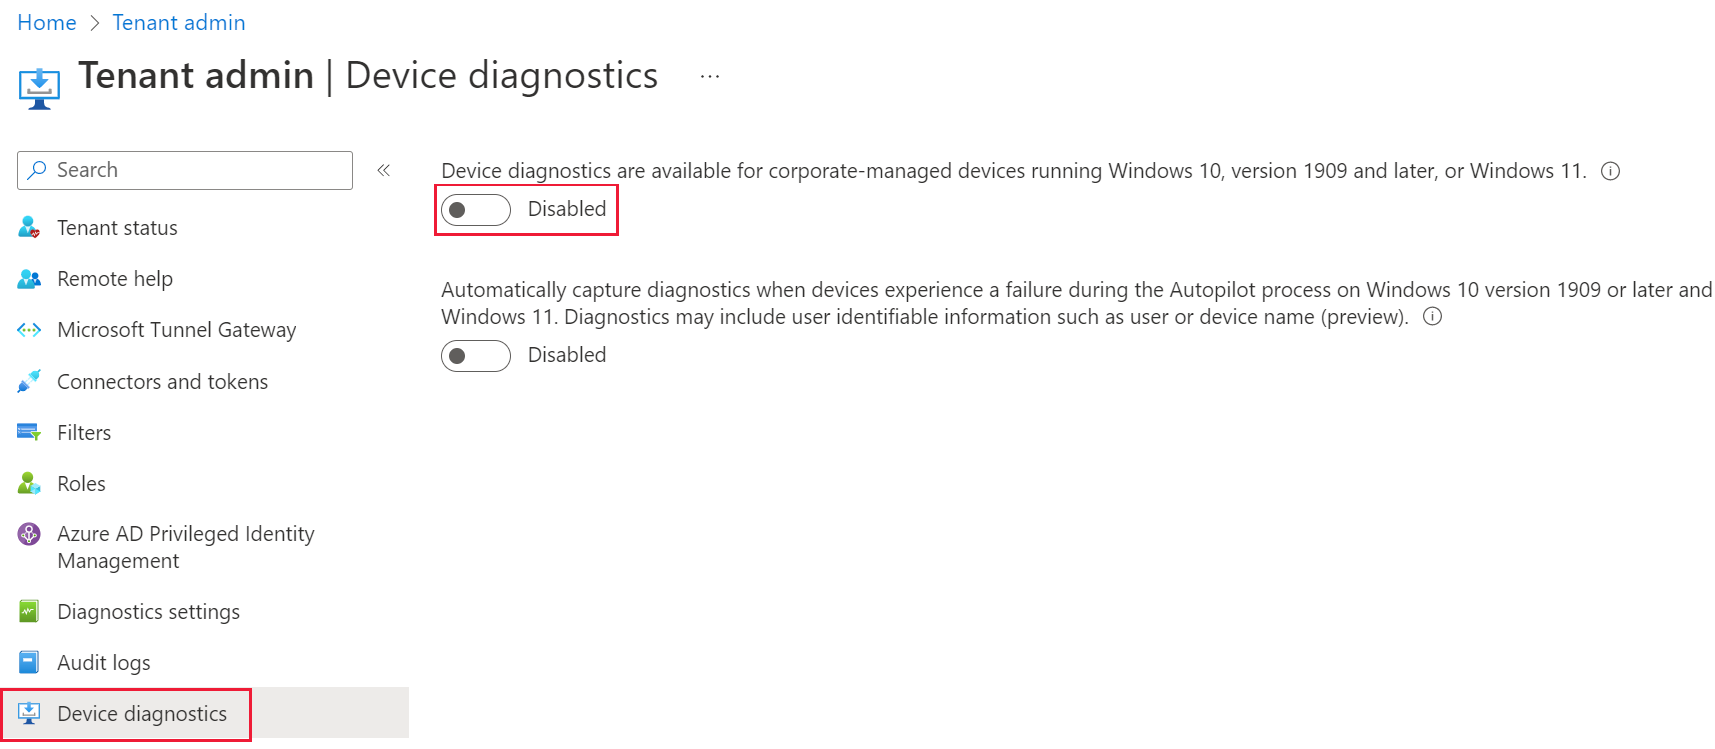 Screenshot that shows the Device diagnostics pane with the highlighted control for device diagnostics set to Disabled.